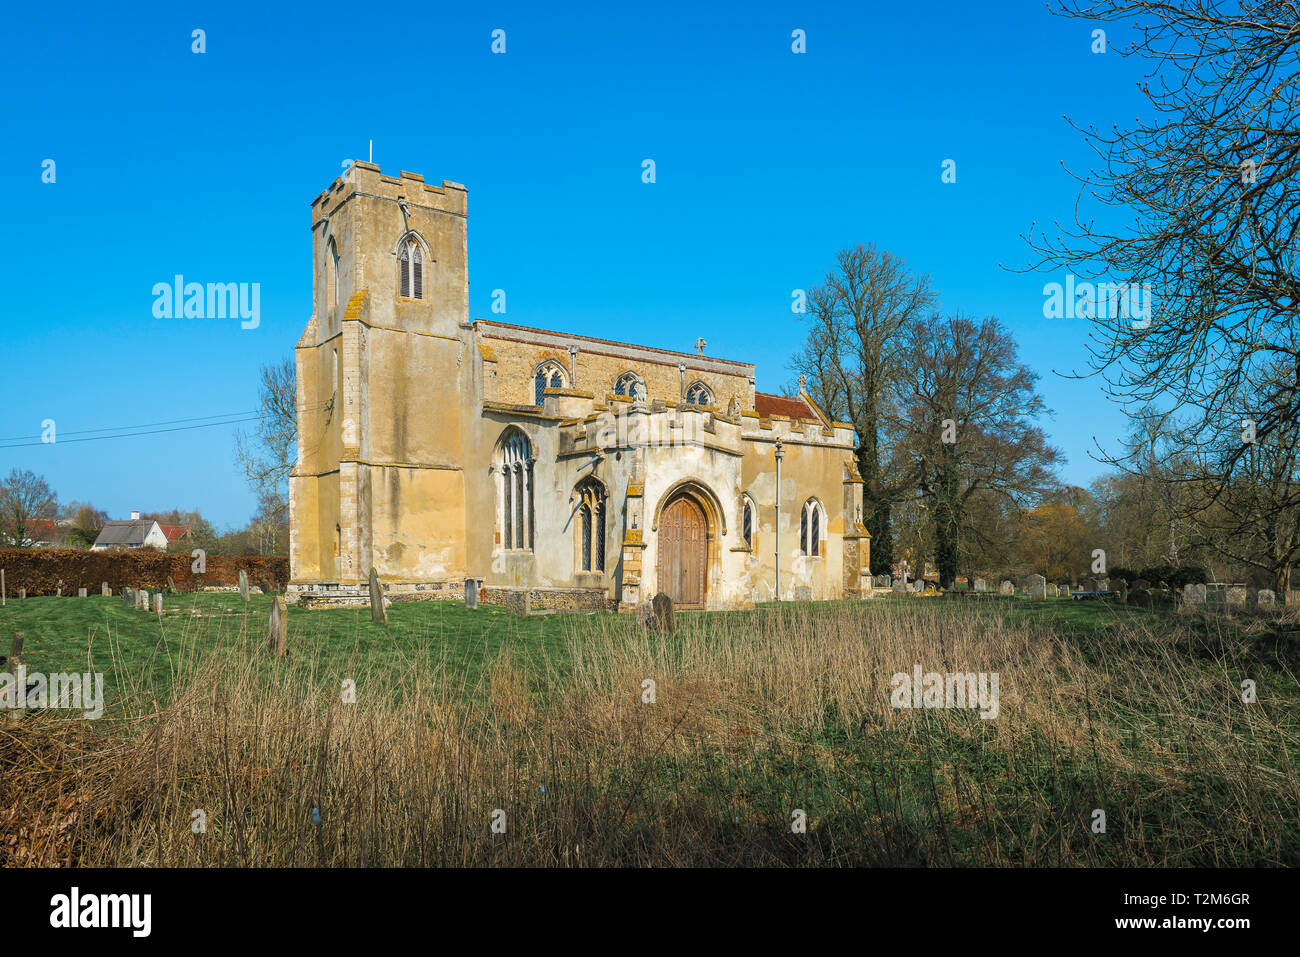 Chelsworth Church, view of the medieval All Saints Church in the village of Chelsworth, Babergh District, Suffolk, England, UK Stock Photo